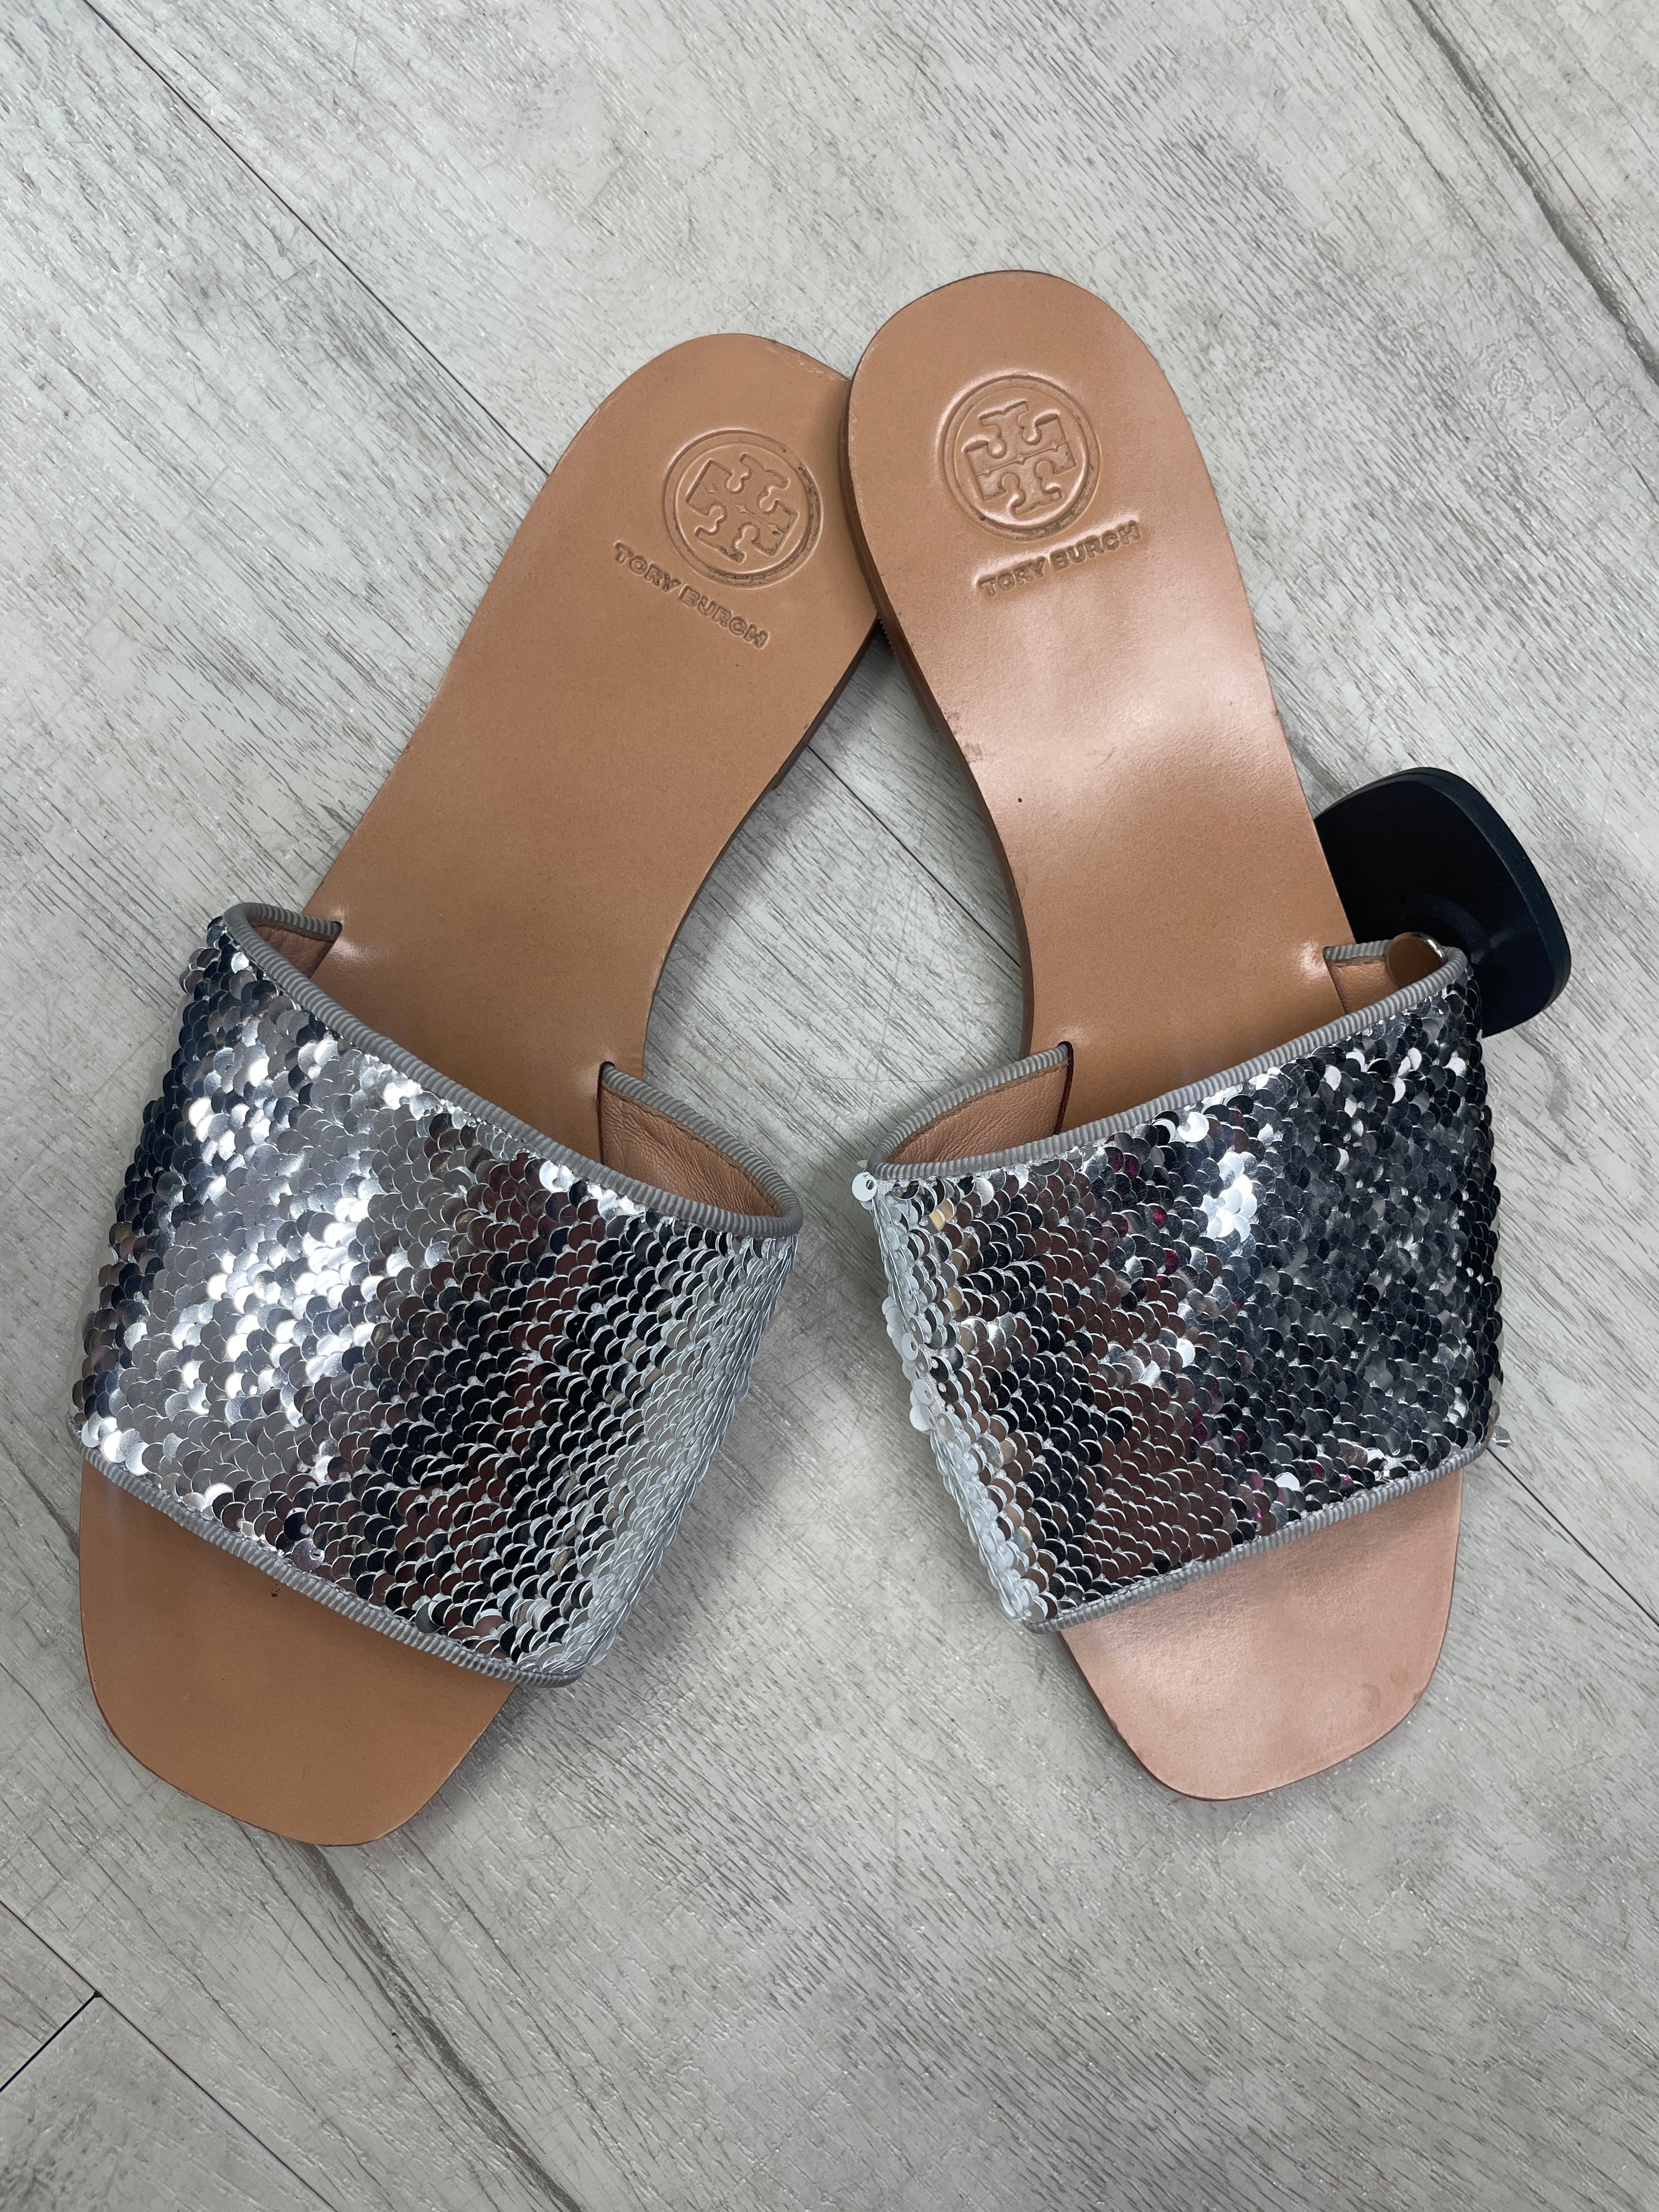 Sandals Flats By Tory Burch Size: 9 – Clothes Mentor Ft Myers FL #168